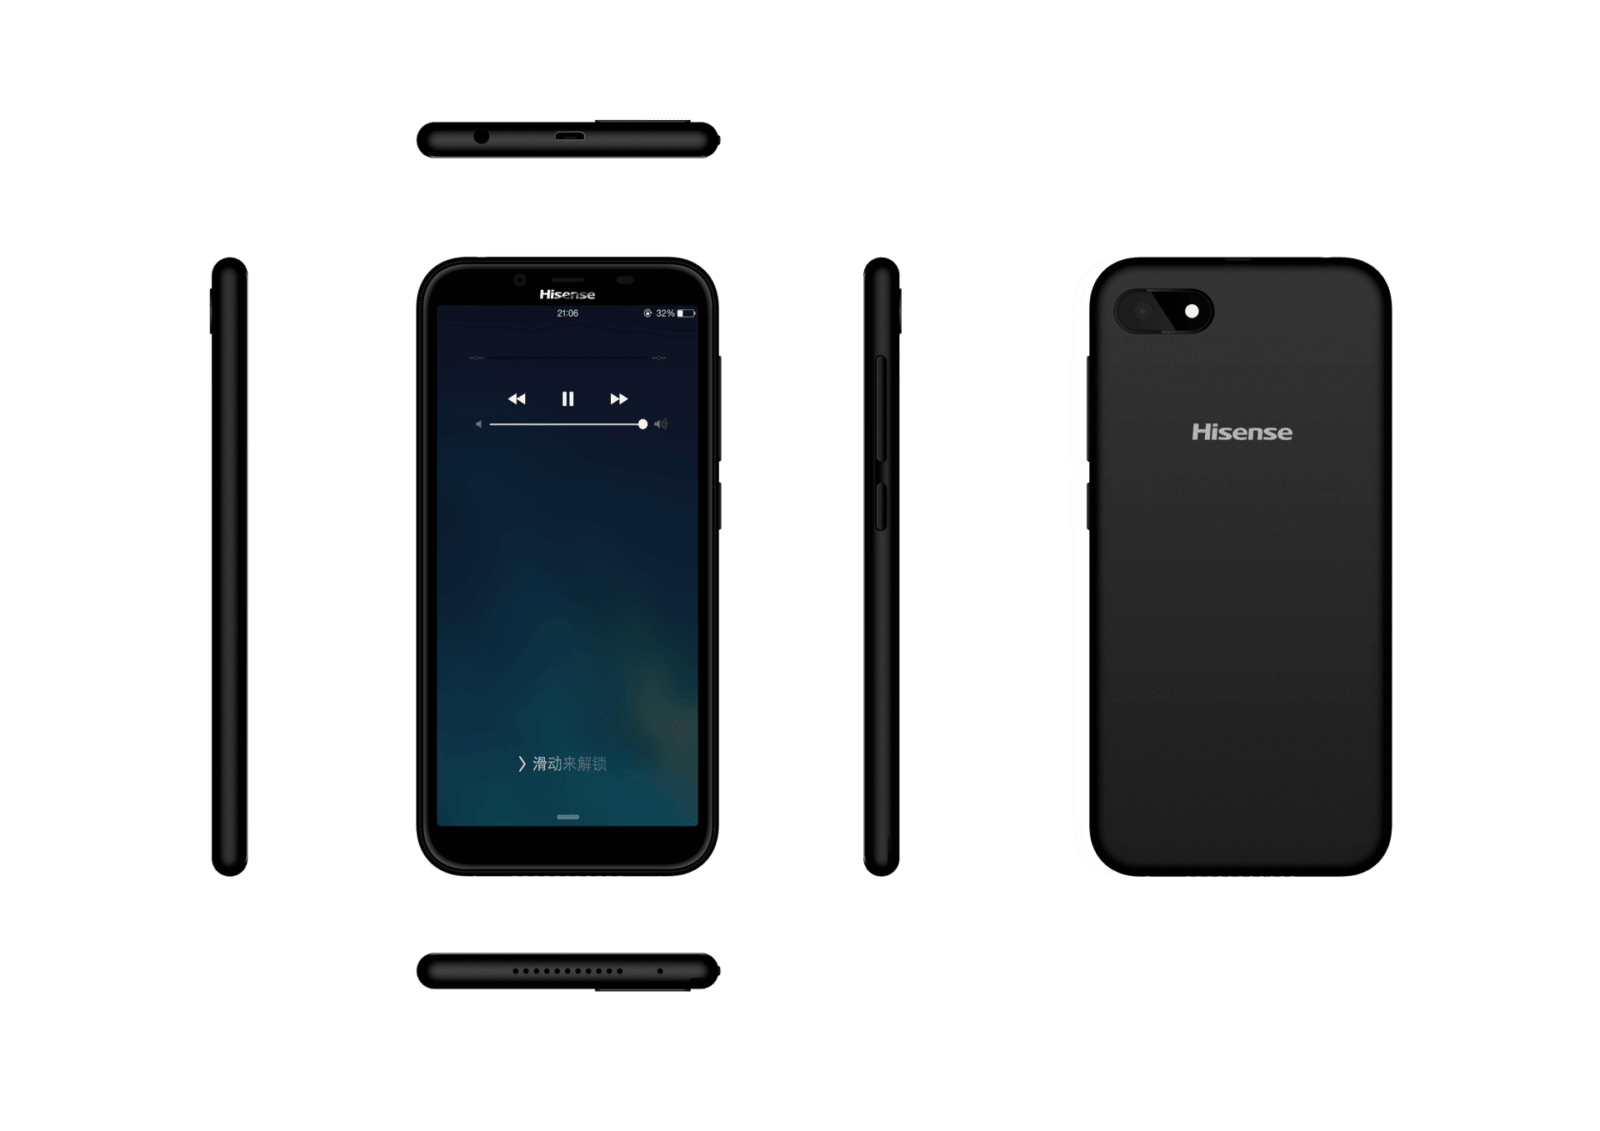 Infinity Screen Hisense InfinityF17 Complete #CES2018 – HISENSE : Nouvelle gamme de smartphone Infinity Screen H11 et F17 Android